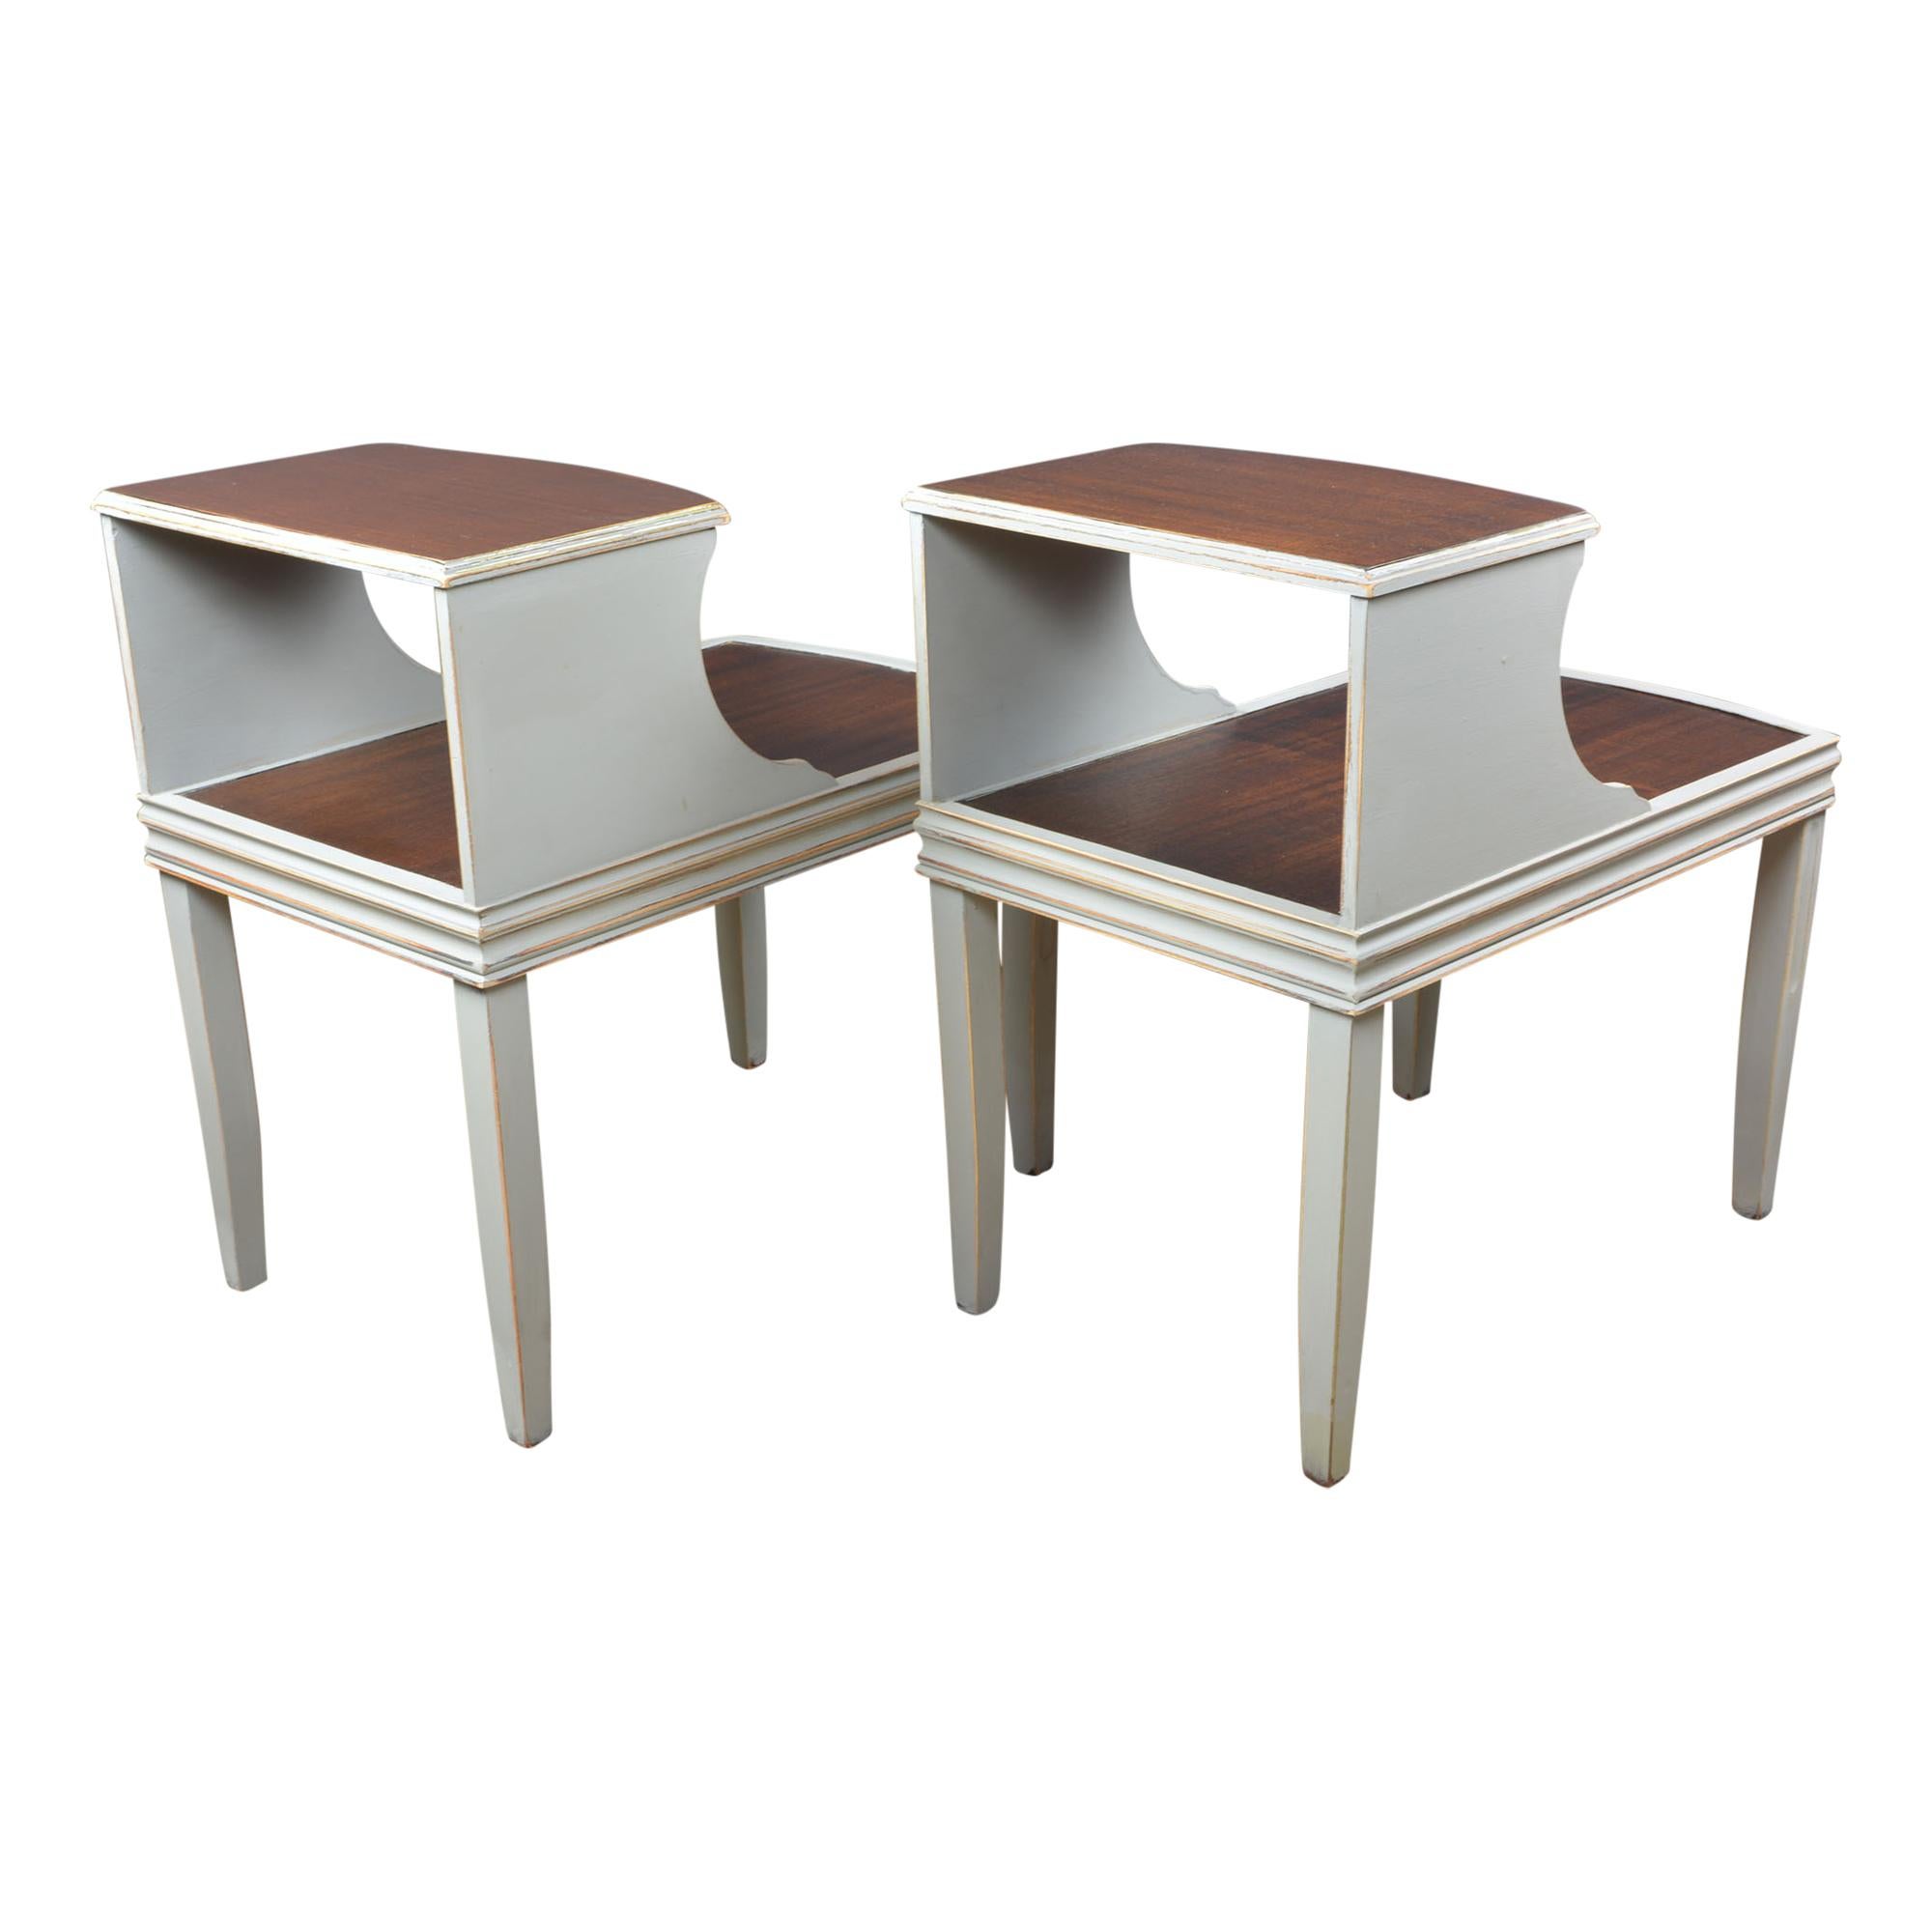 20th Century Mid-Century Modern End Tables Gray and Deep Brown, Pair